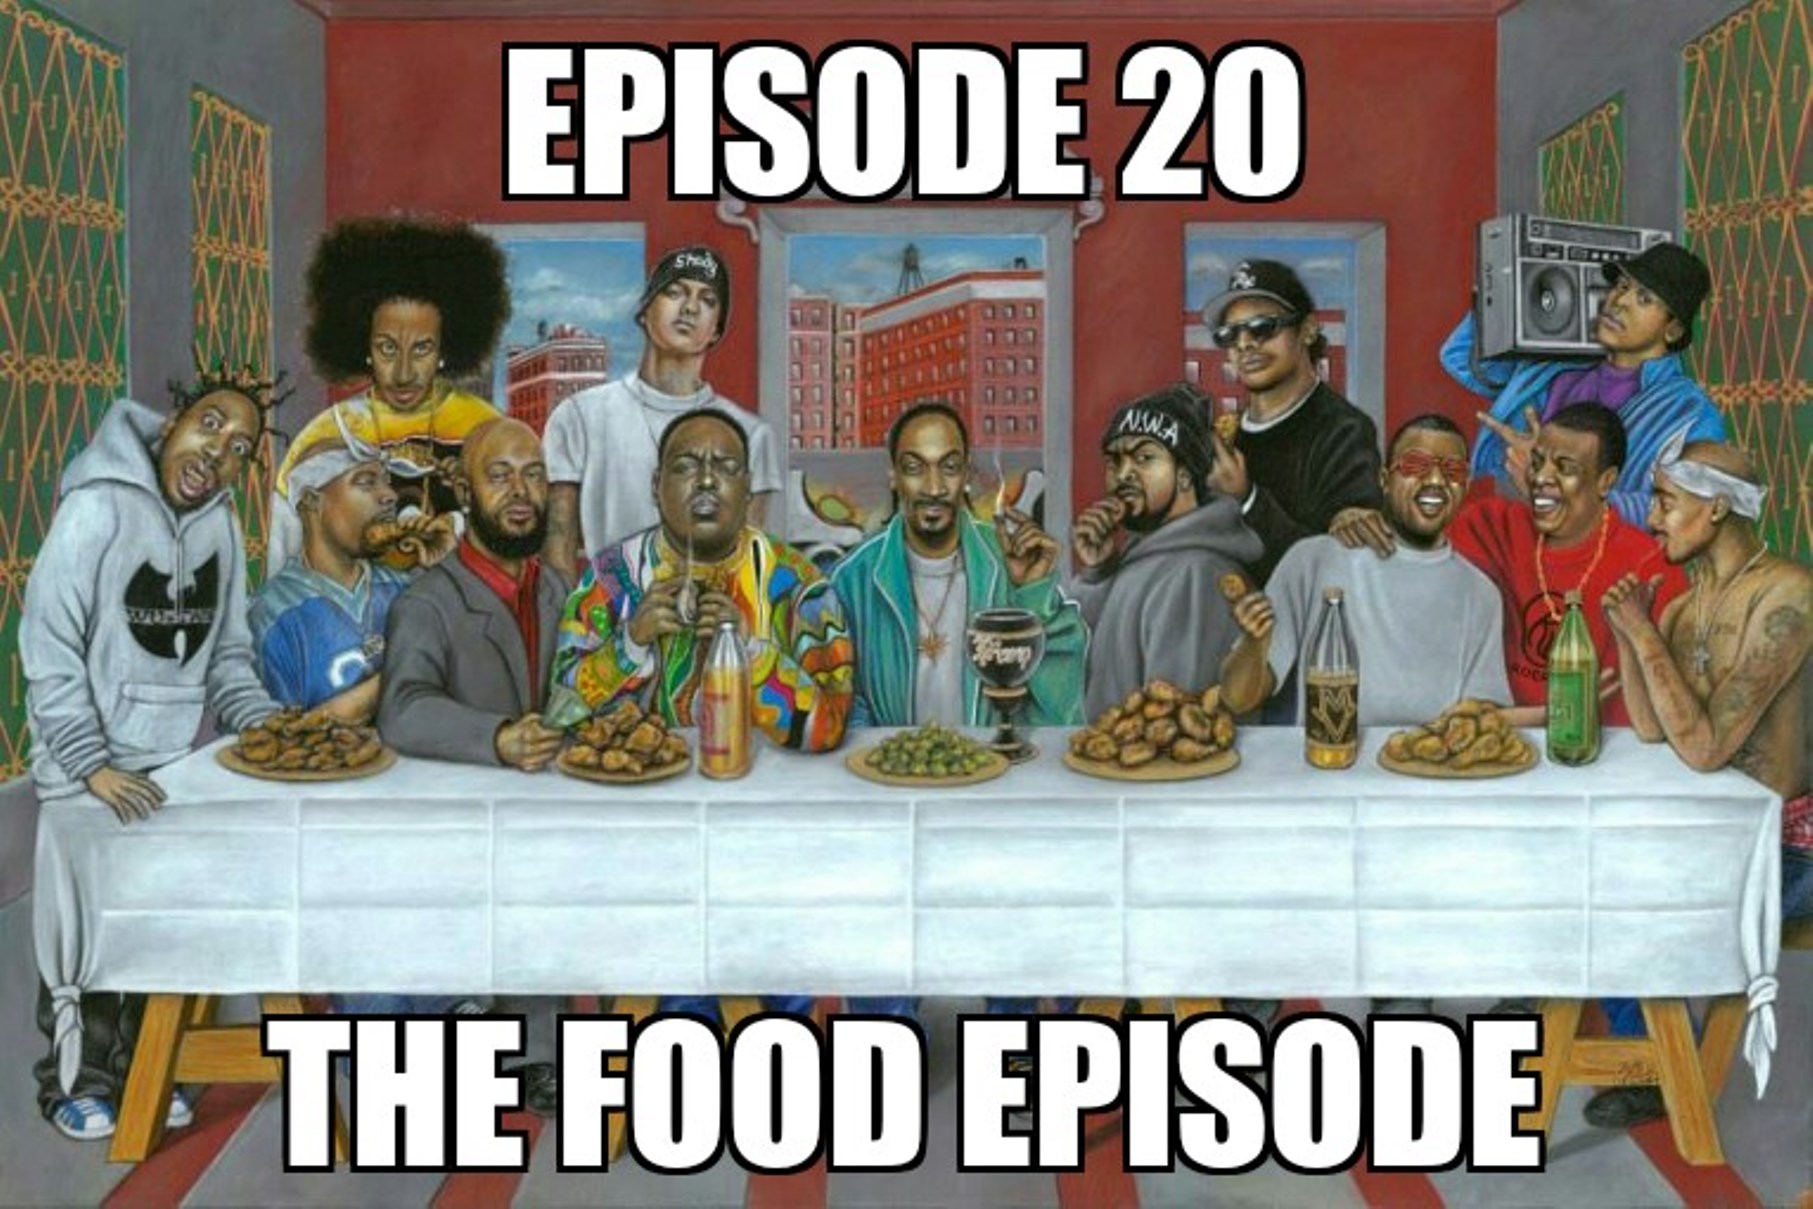 Episode 20: The Food Episode